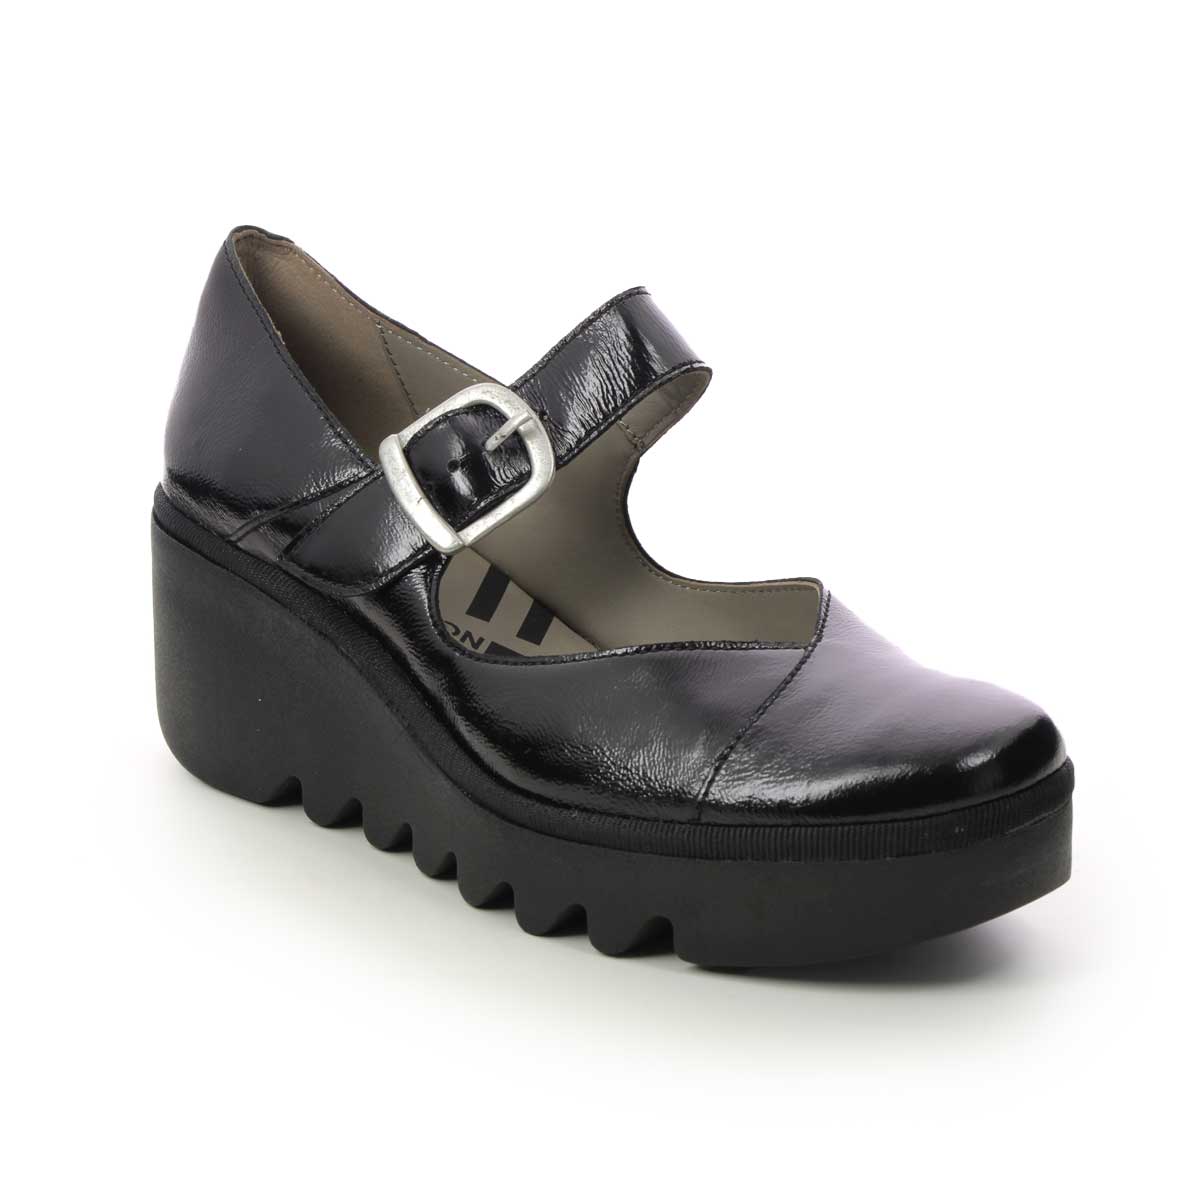 Fly London Baxe  Blu Lmj Black patent Womens Wedge Shoes P501428-003 in a Plain Leather in Size 40